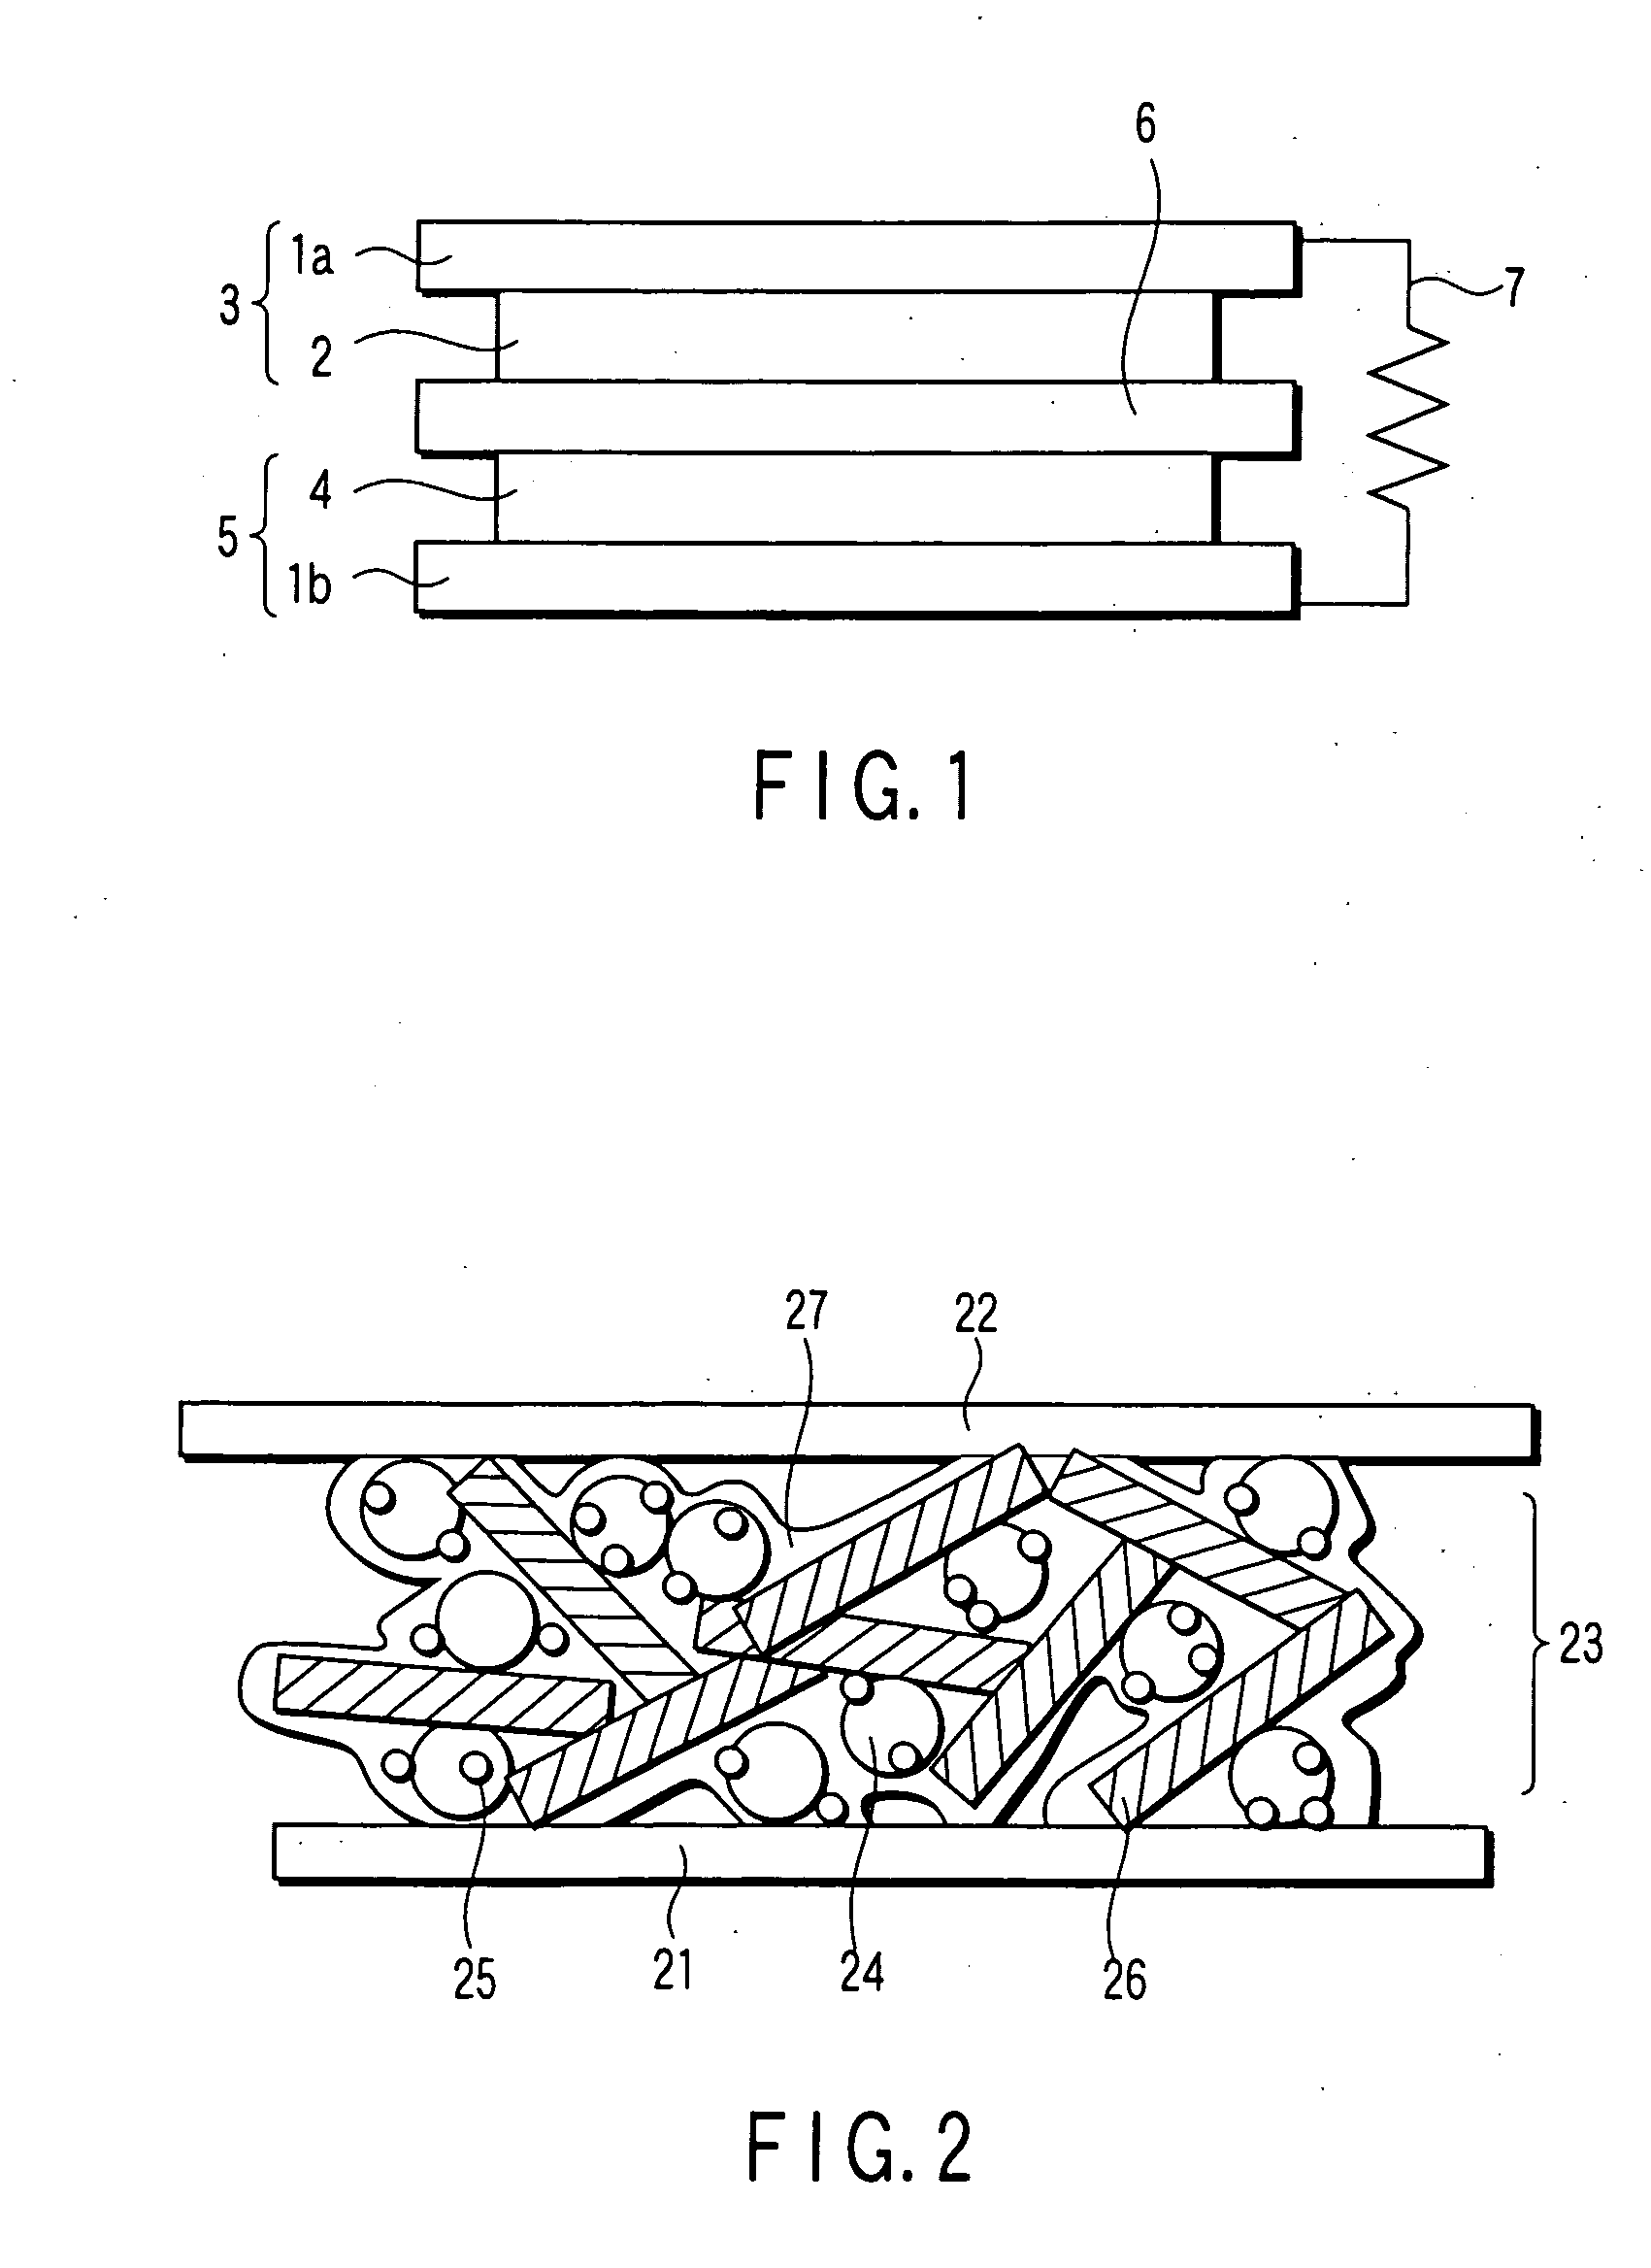 Catalyst, electrode, membrane electrode assembly and fuel cell